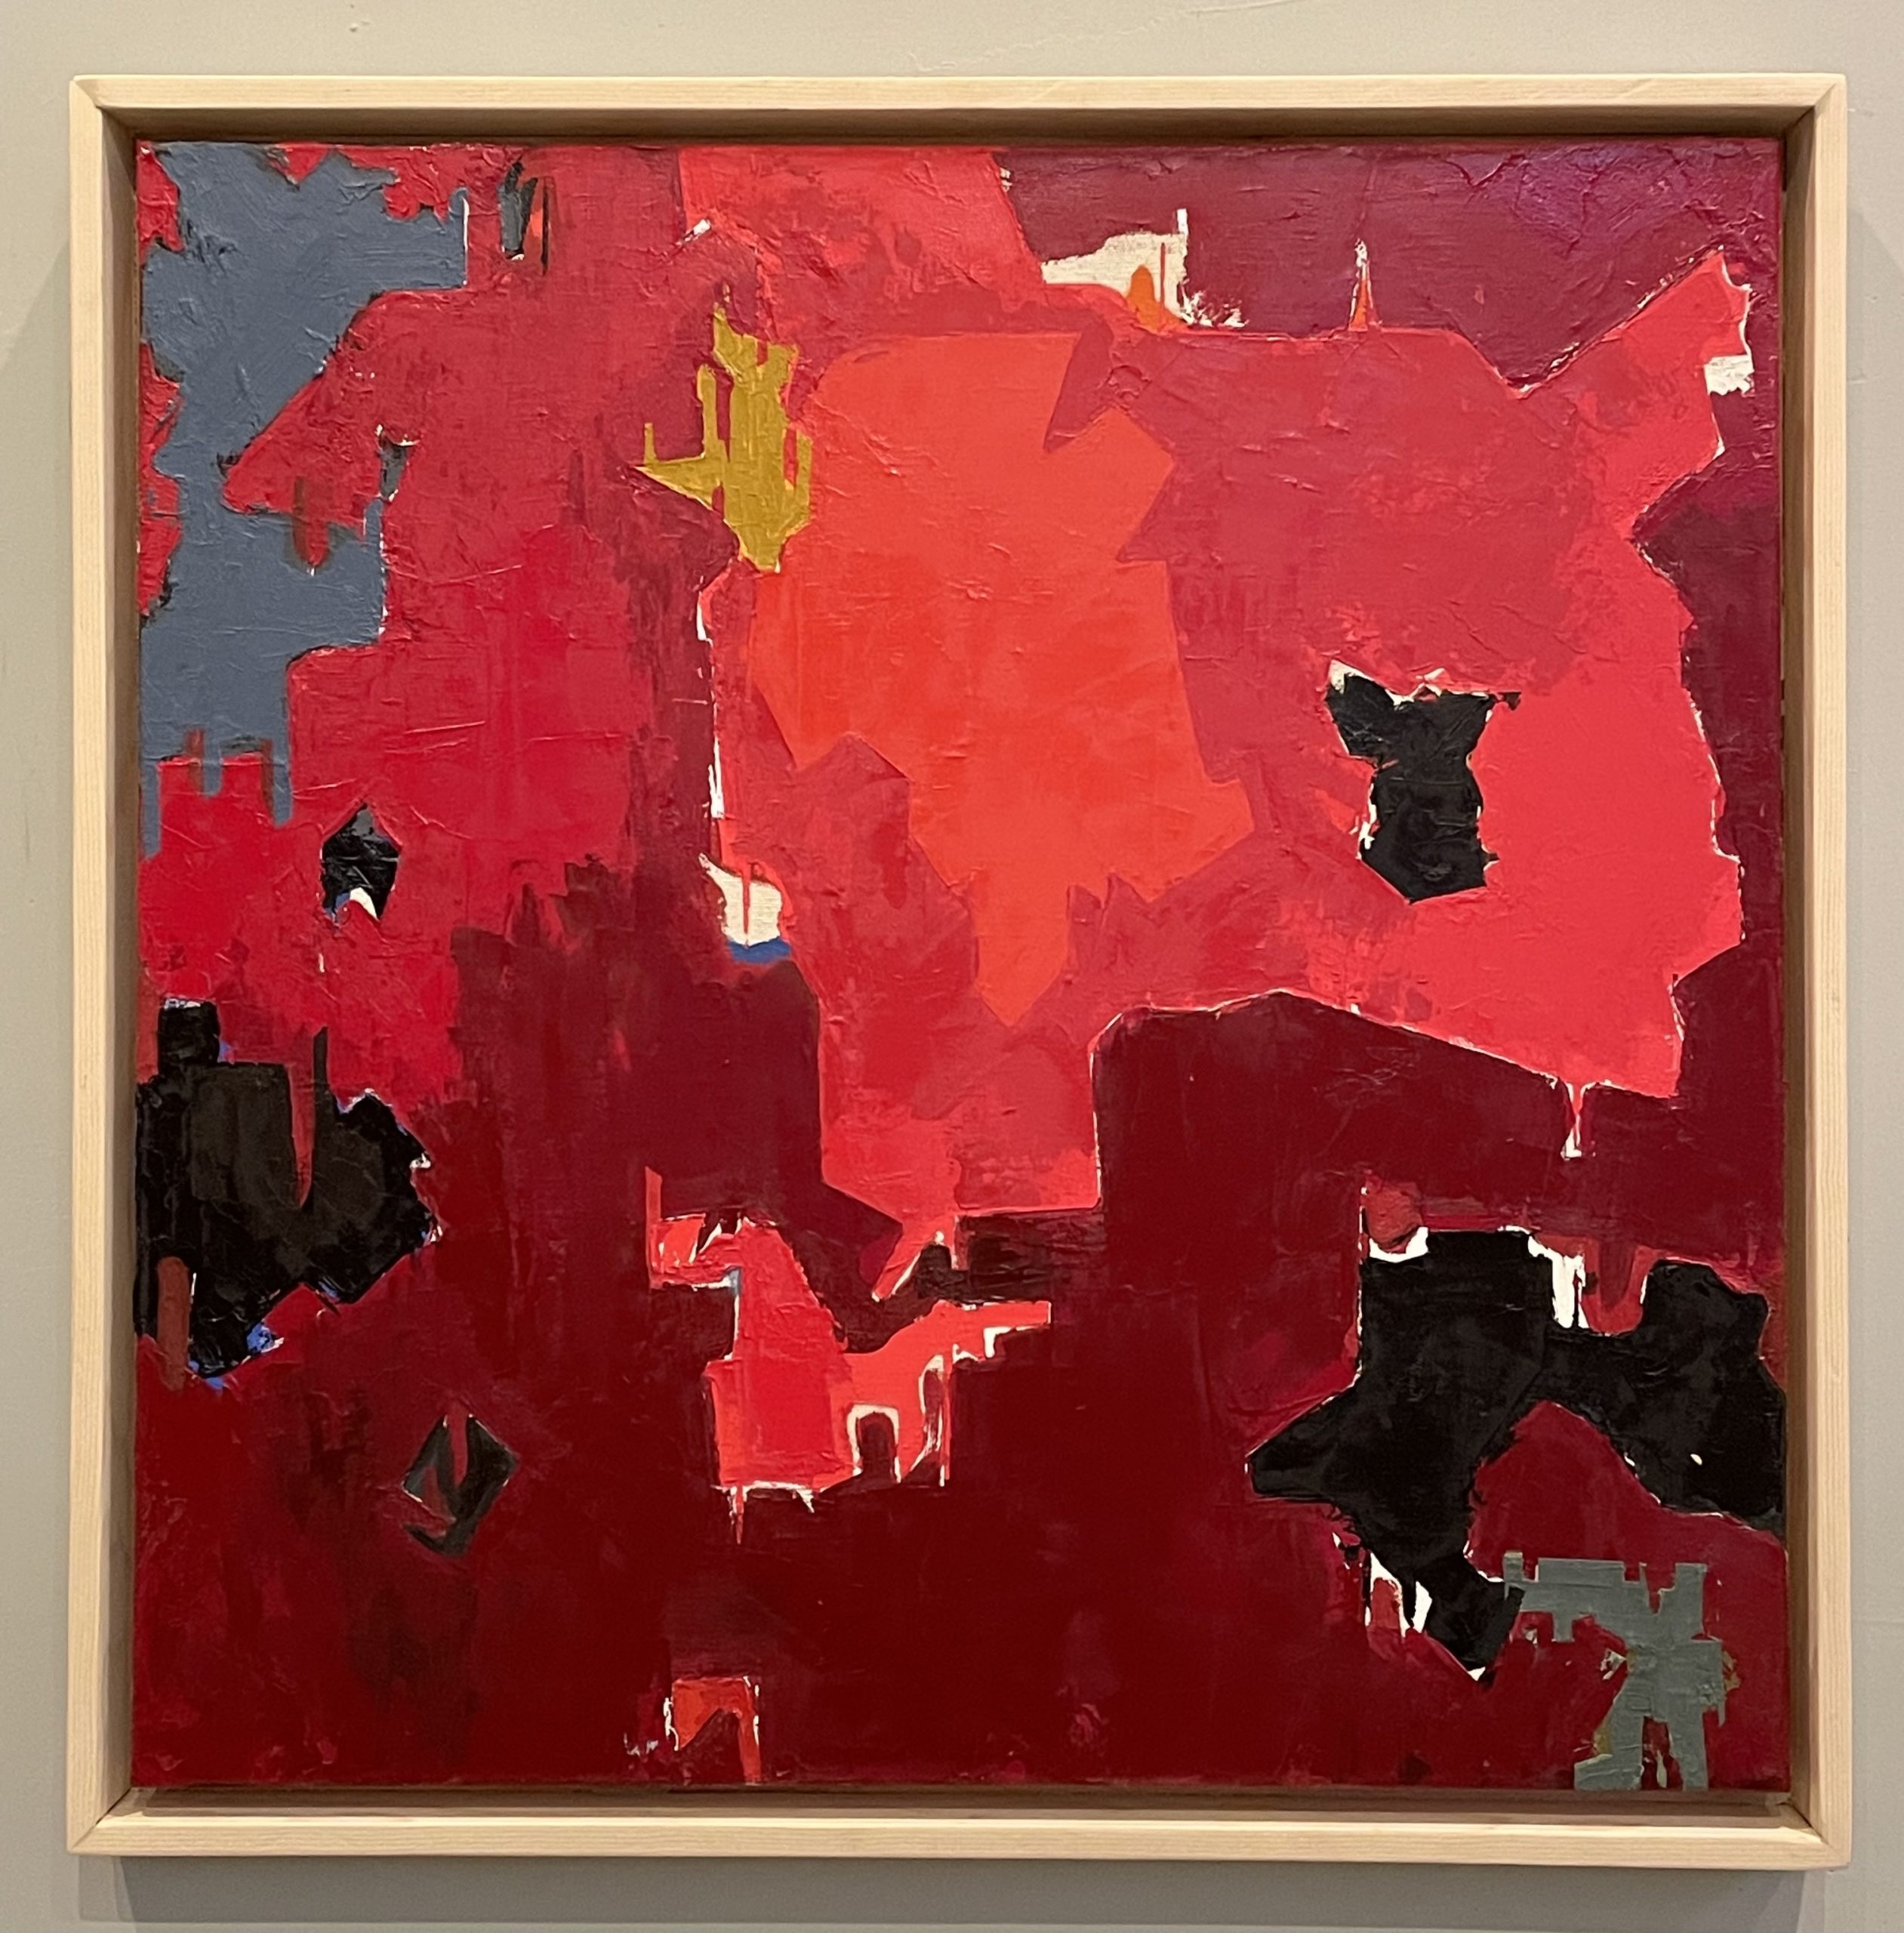 Kevin Teare “Clyfford Still As Gerrymandered Republican Congressional Districts,” 2020. Oil on canvas, 25” x 25”.